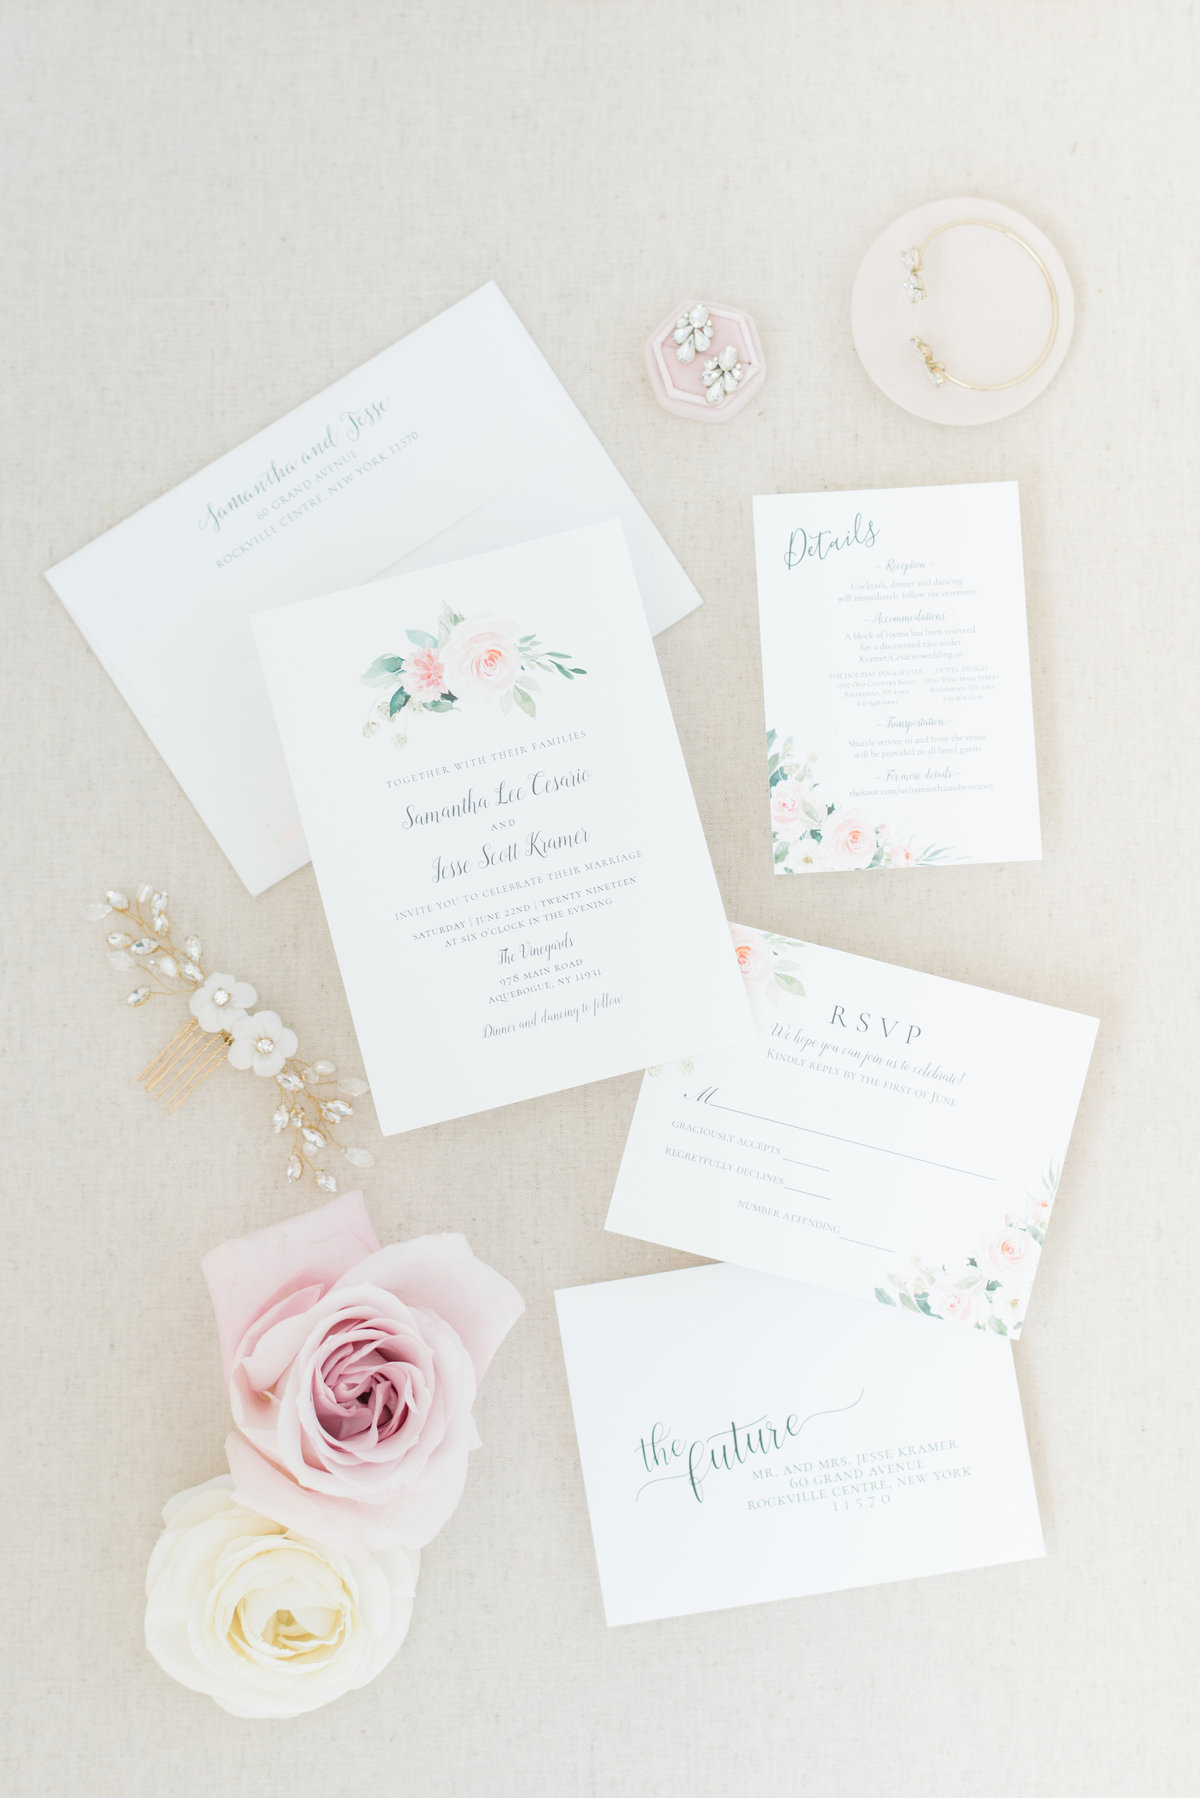 wedding-invitations-with-flowers-on-styling-board